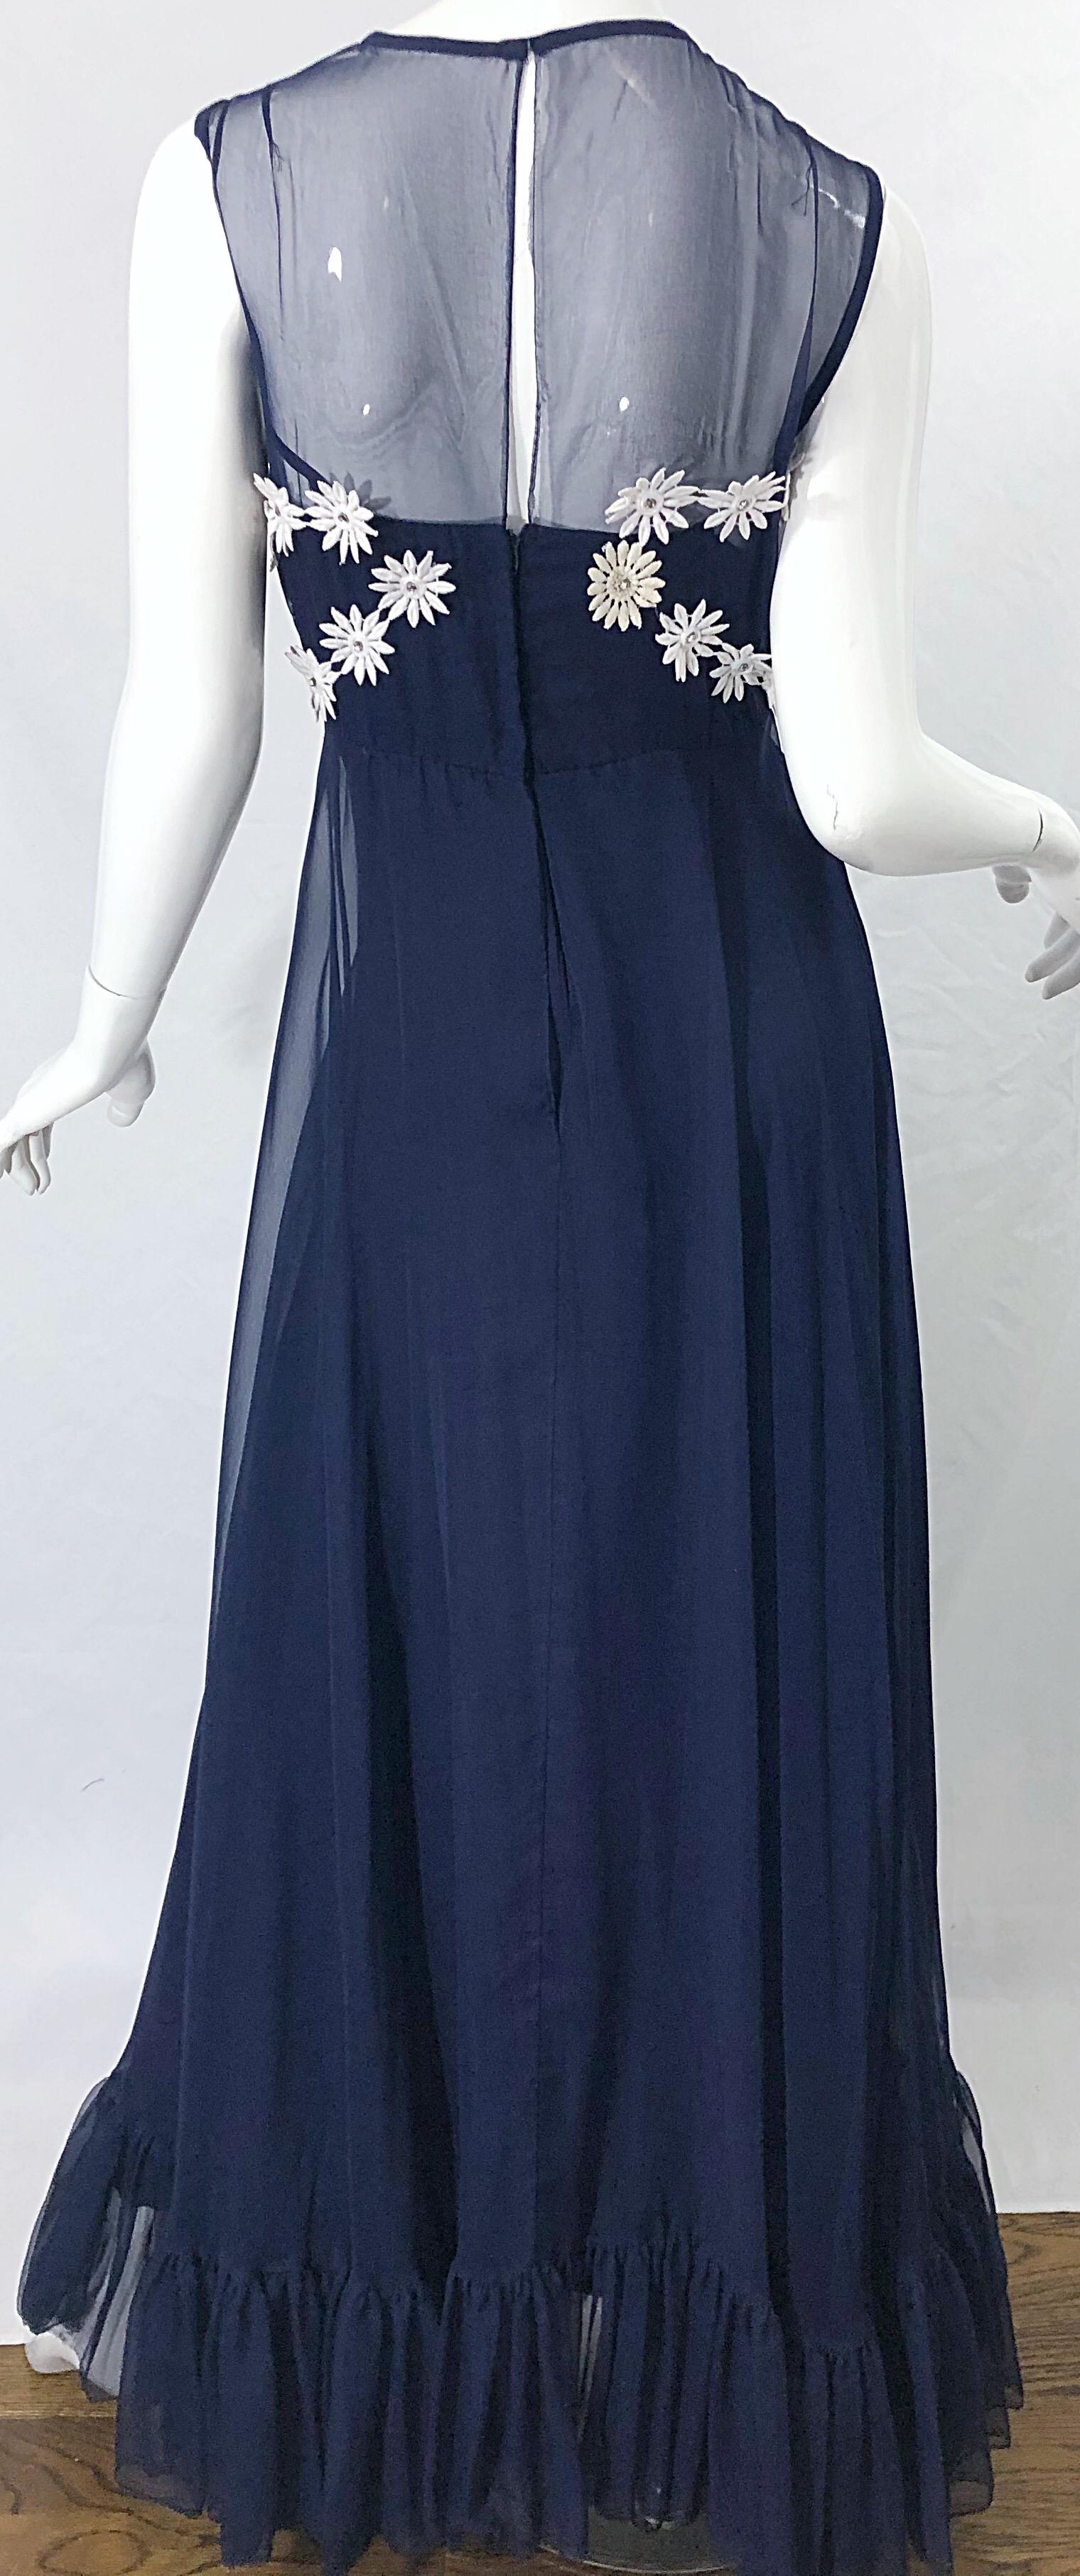 1960s Navy Blue Chiffon White Rhinestone Flowers Vintage 60s Gown Maxi Dress For Sale 2